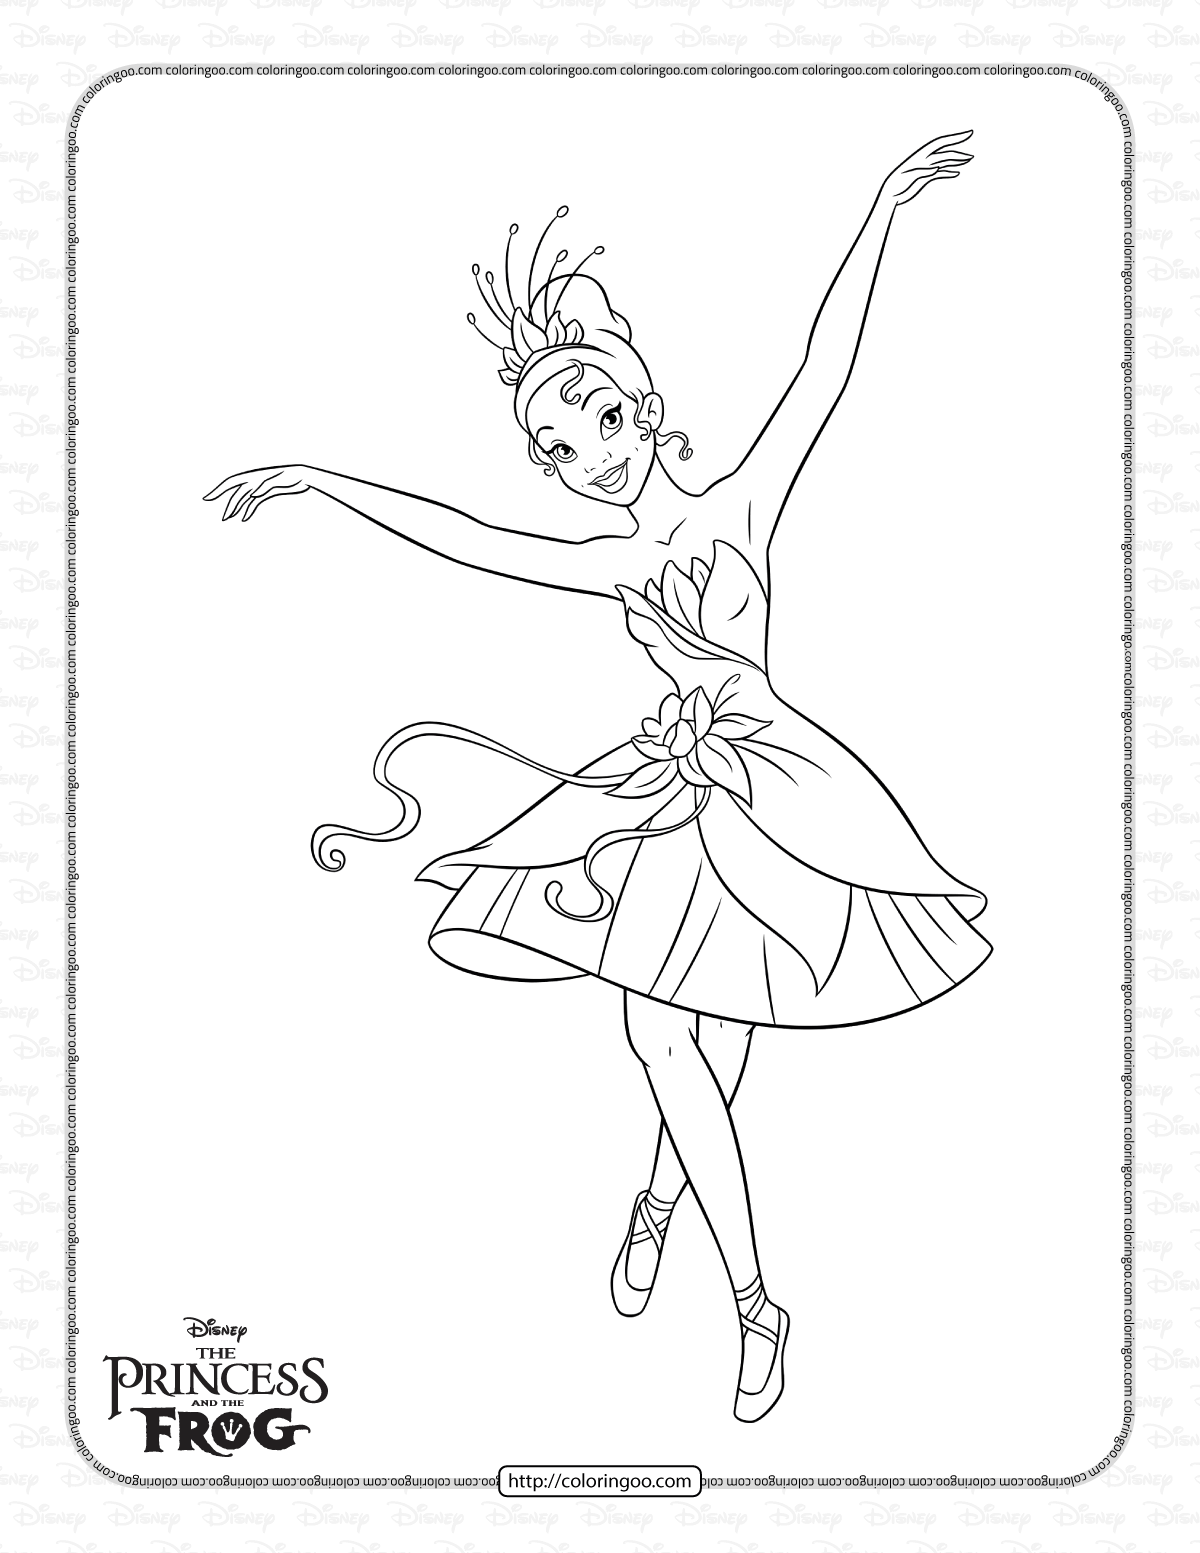 tiana wants to be a ballet dancer coloring page